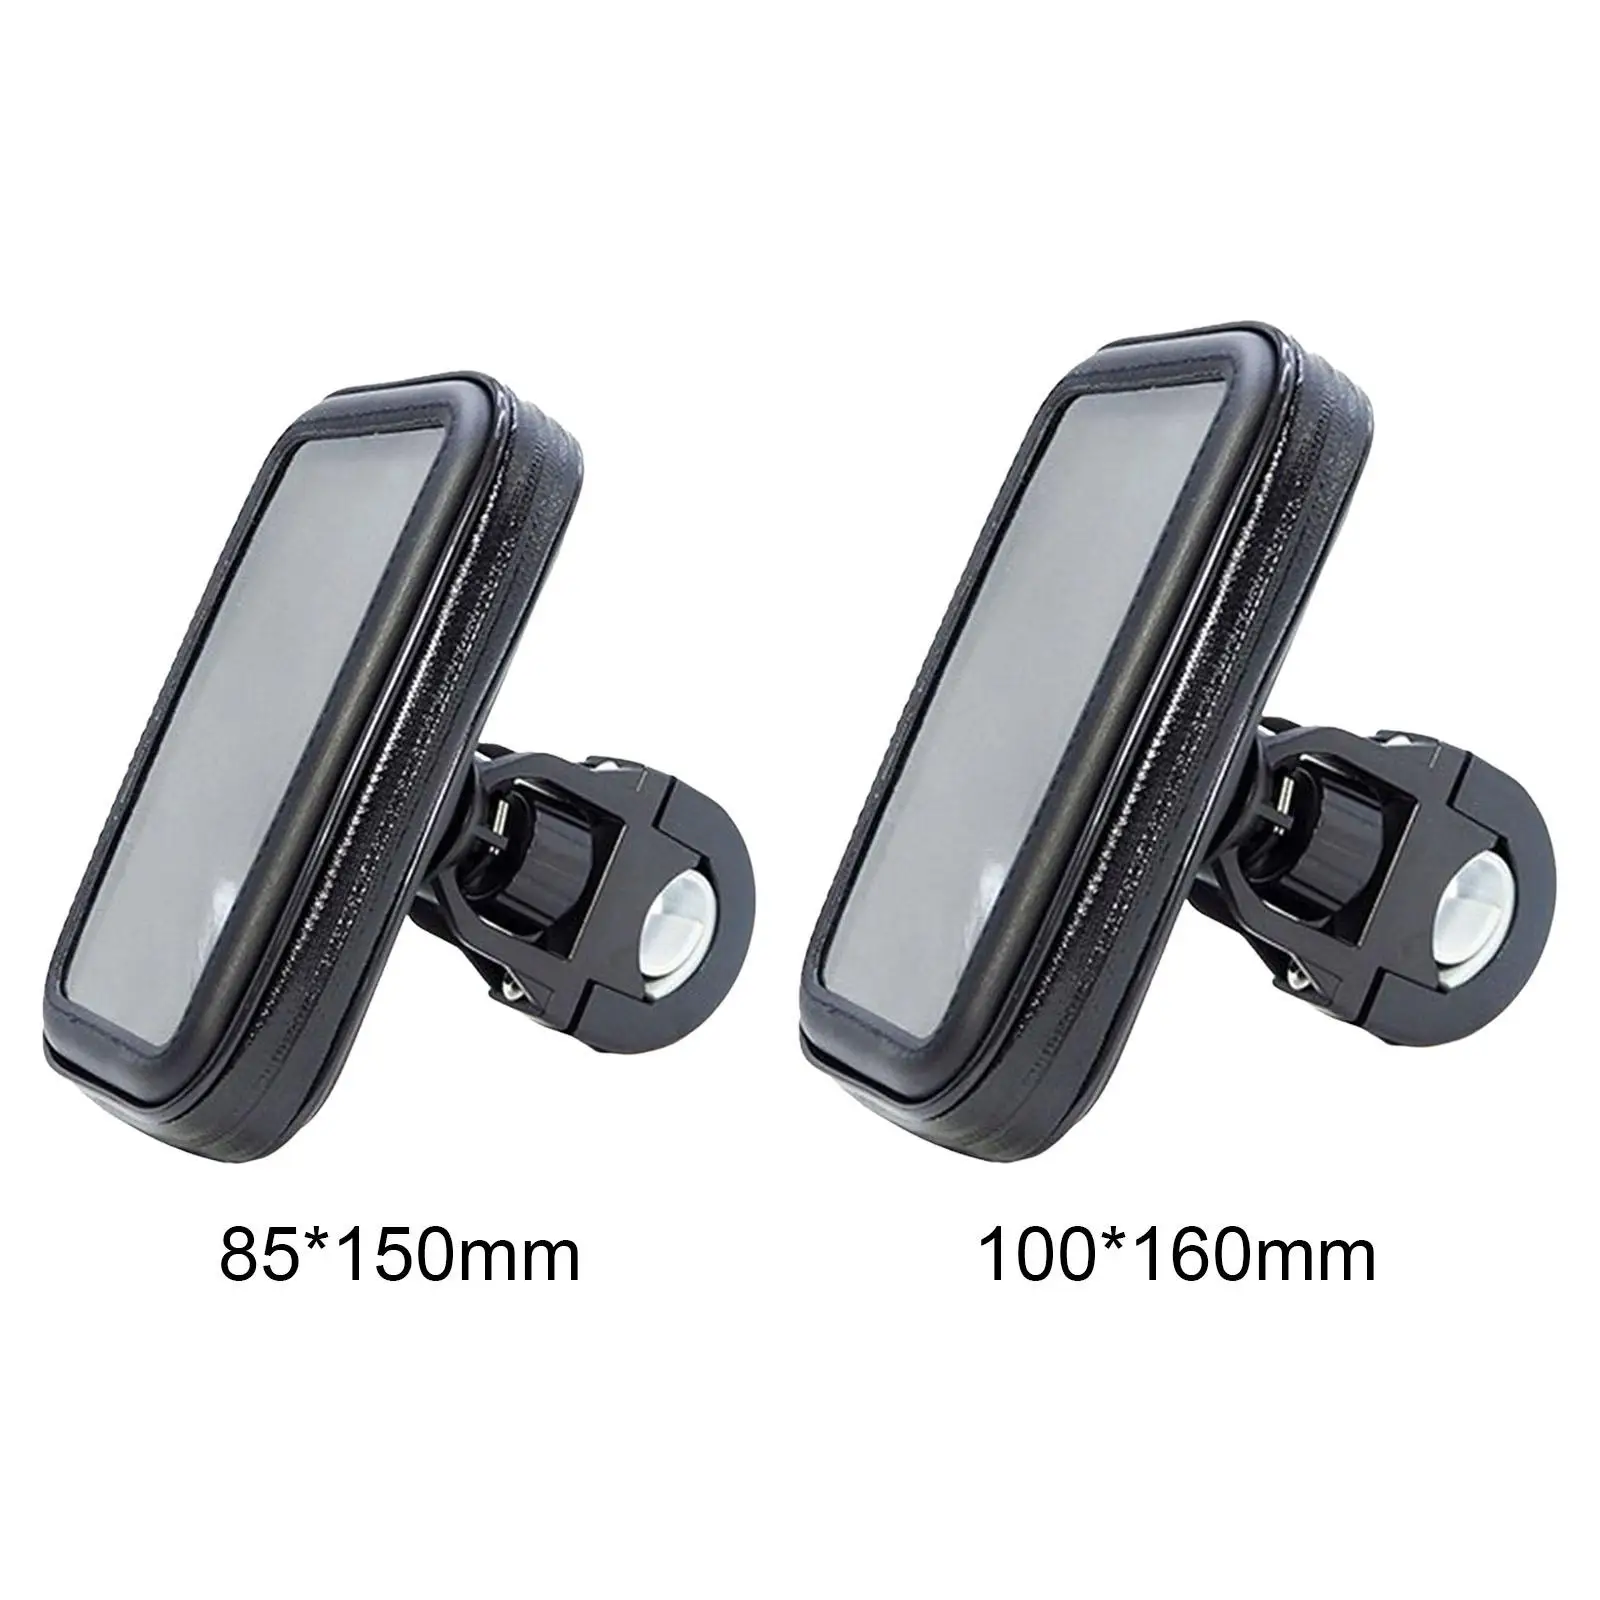 Bicycle Bike Phone Case Transparent Cover Bicycle Cell Phone Holder Handlebar Bag Mount Holder